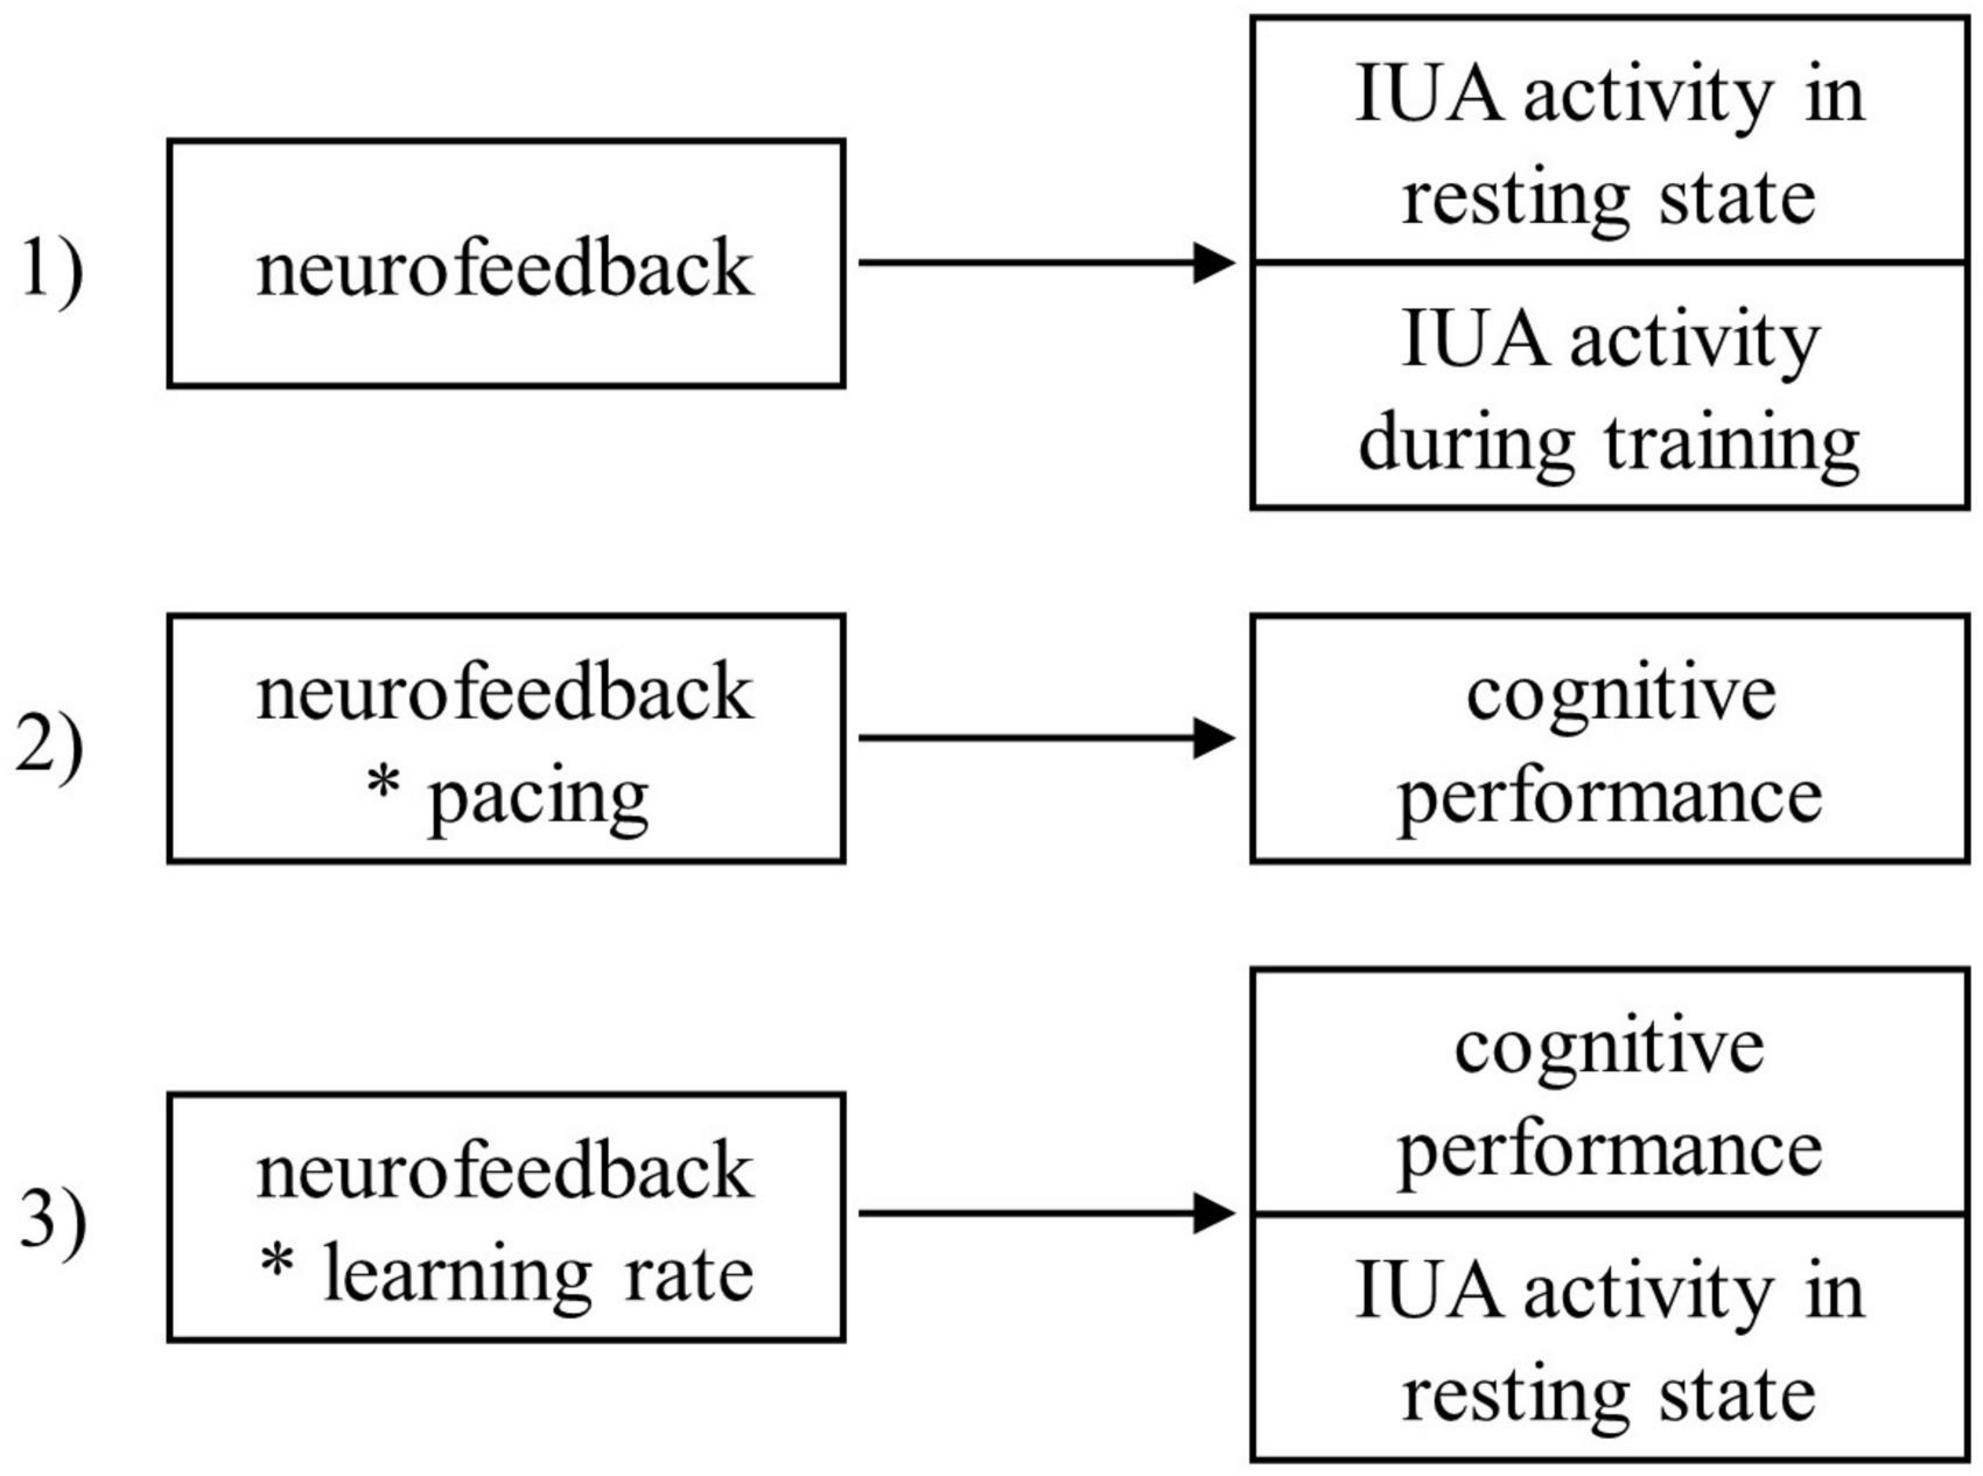 The more, the better? Learning rate and self-pacing in neurofeedback enhance cognitive performance in healthy adults